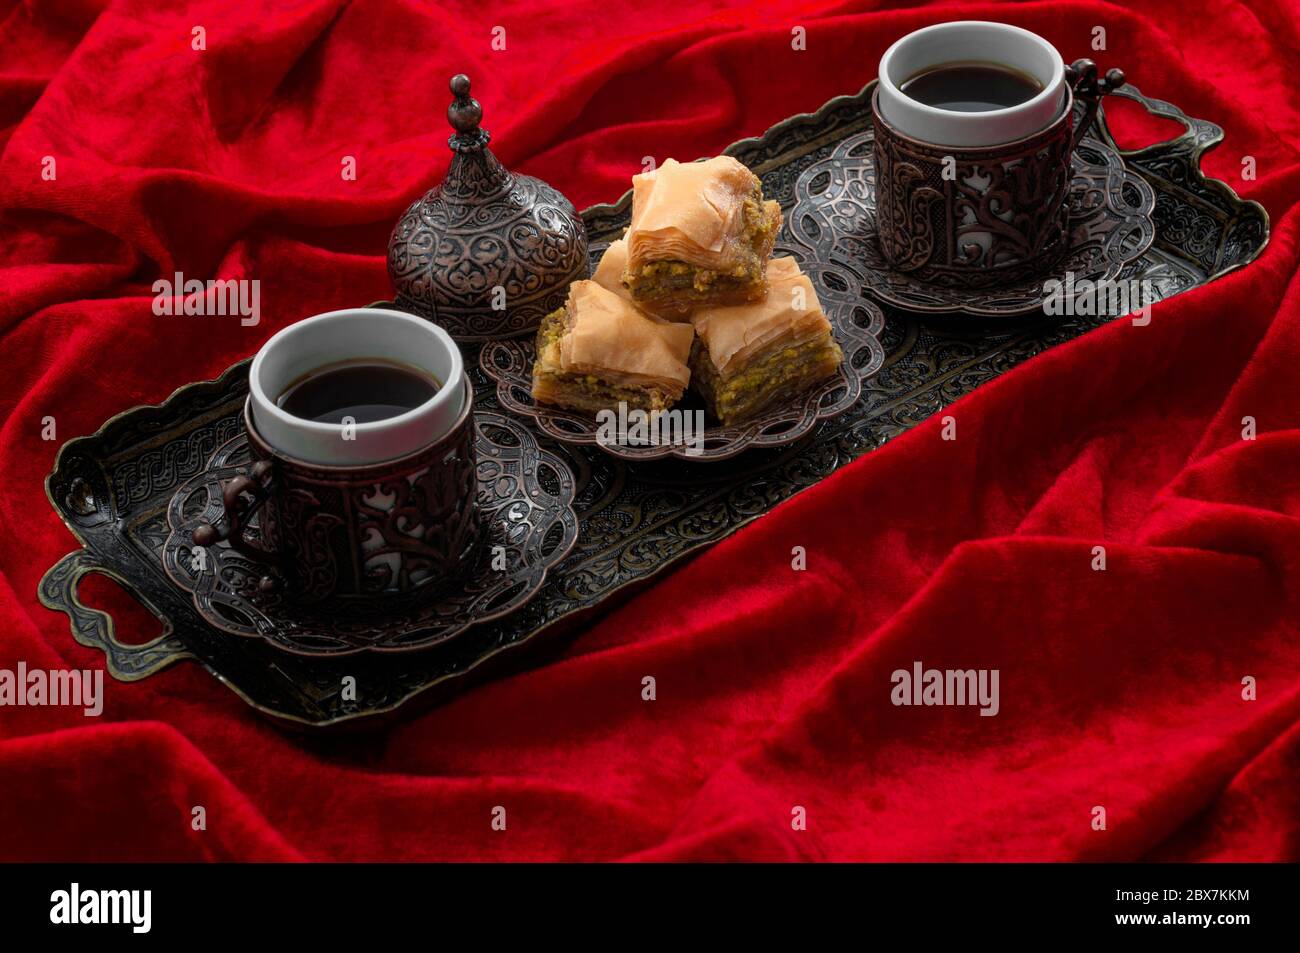 Ramadan treat and arabian hospitality concept with turkish baklava and mini coffee cups on authentic mediterranean metal tray isolated on red velvet f Stock Photo